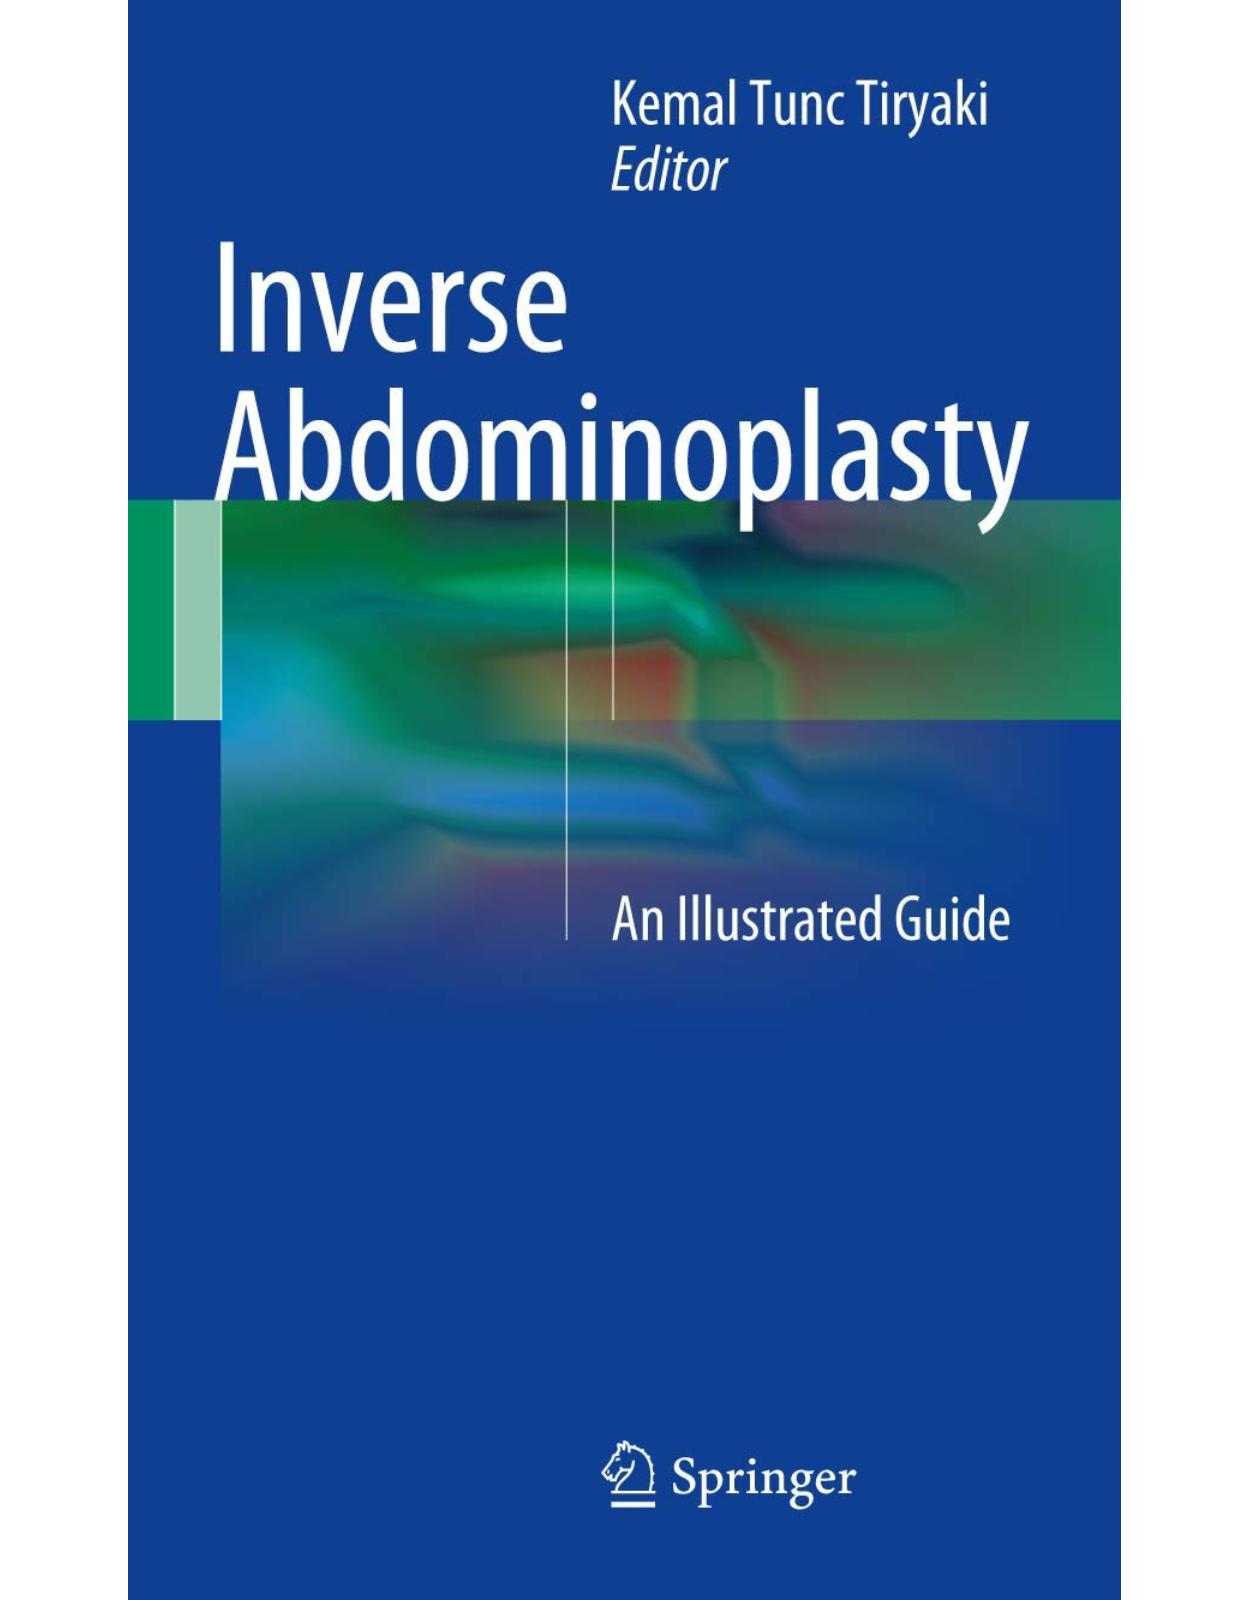 Inverse Abdominoplasty: An Illustrated Guide